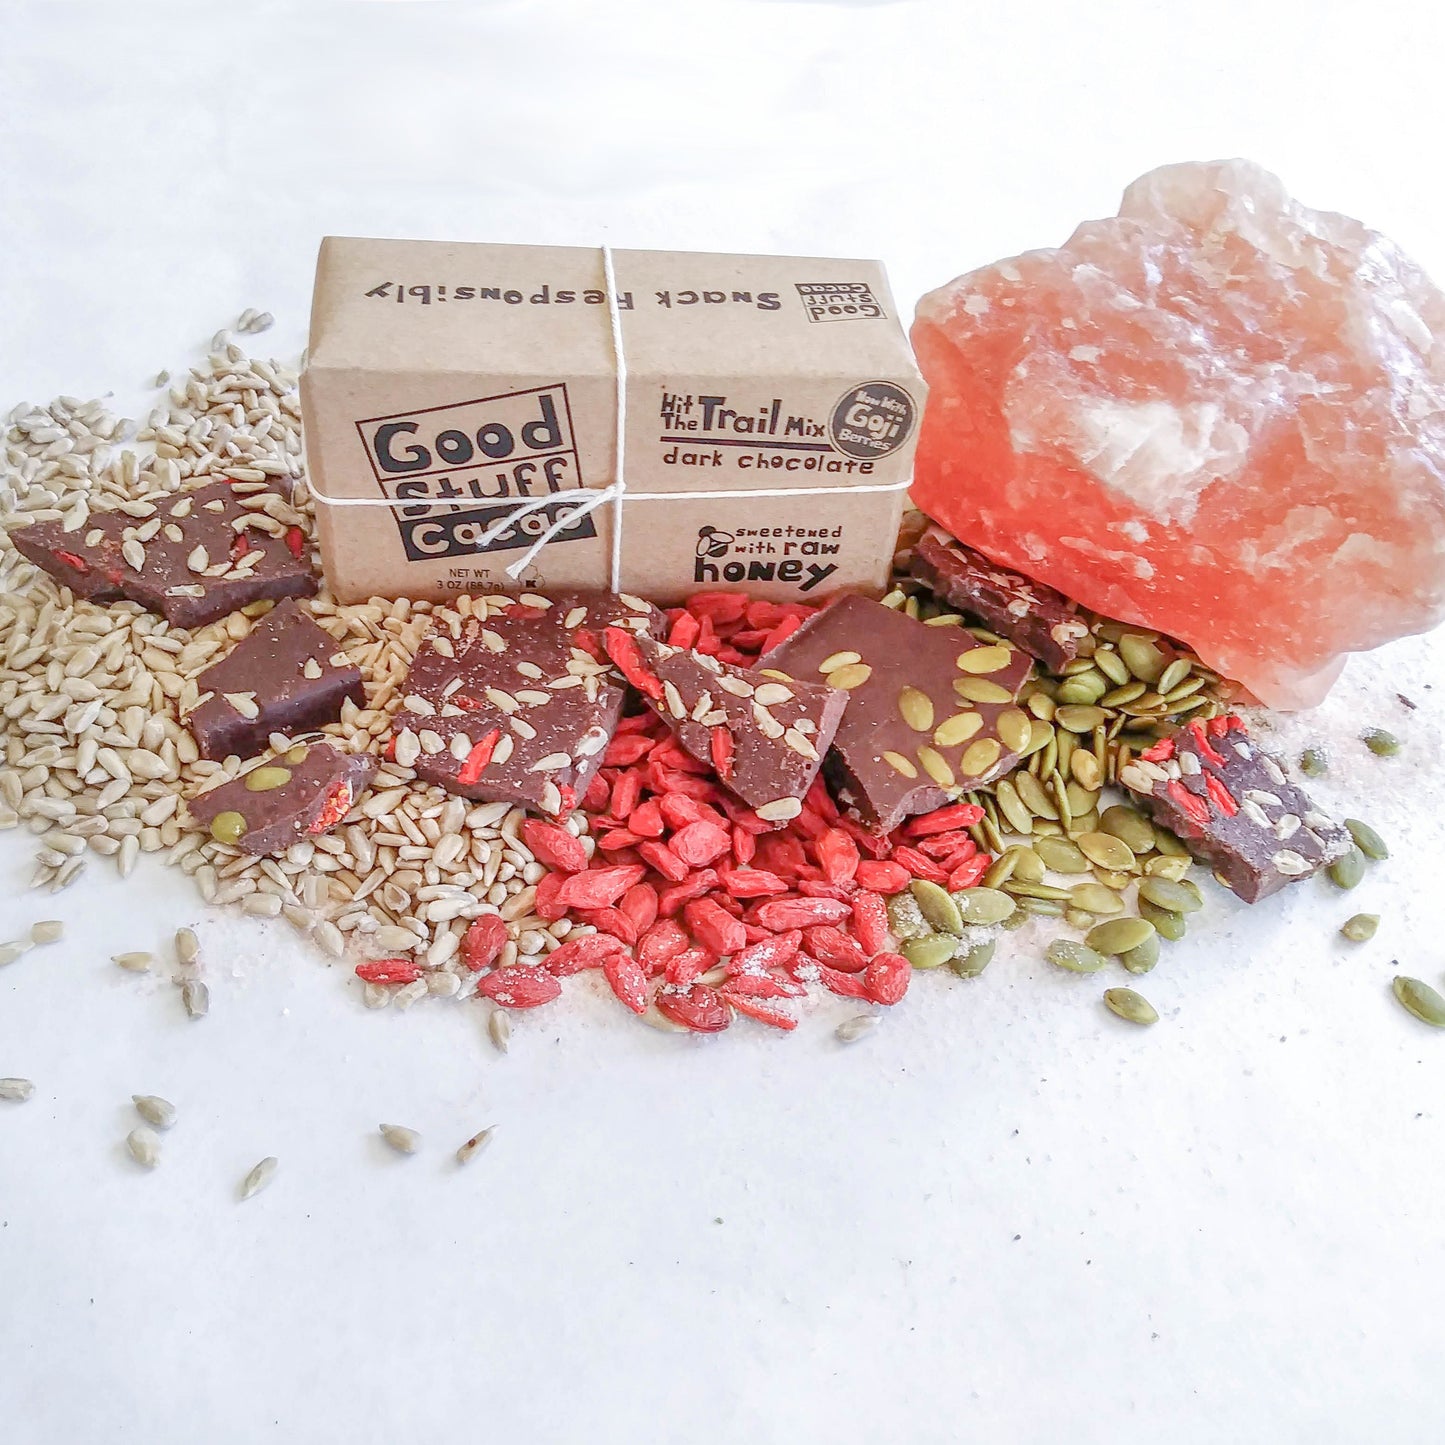 Hit the Trail Mix with Goji Berry